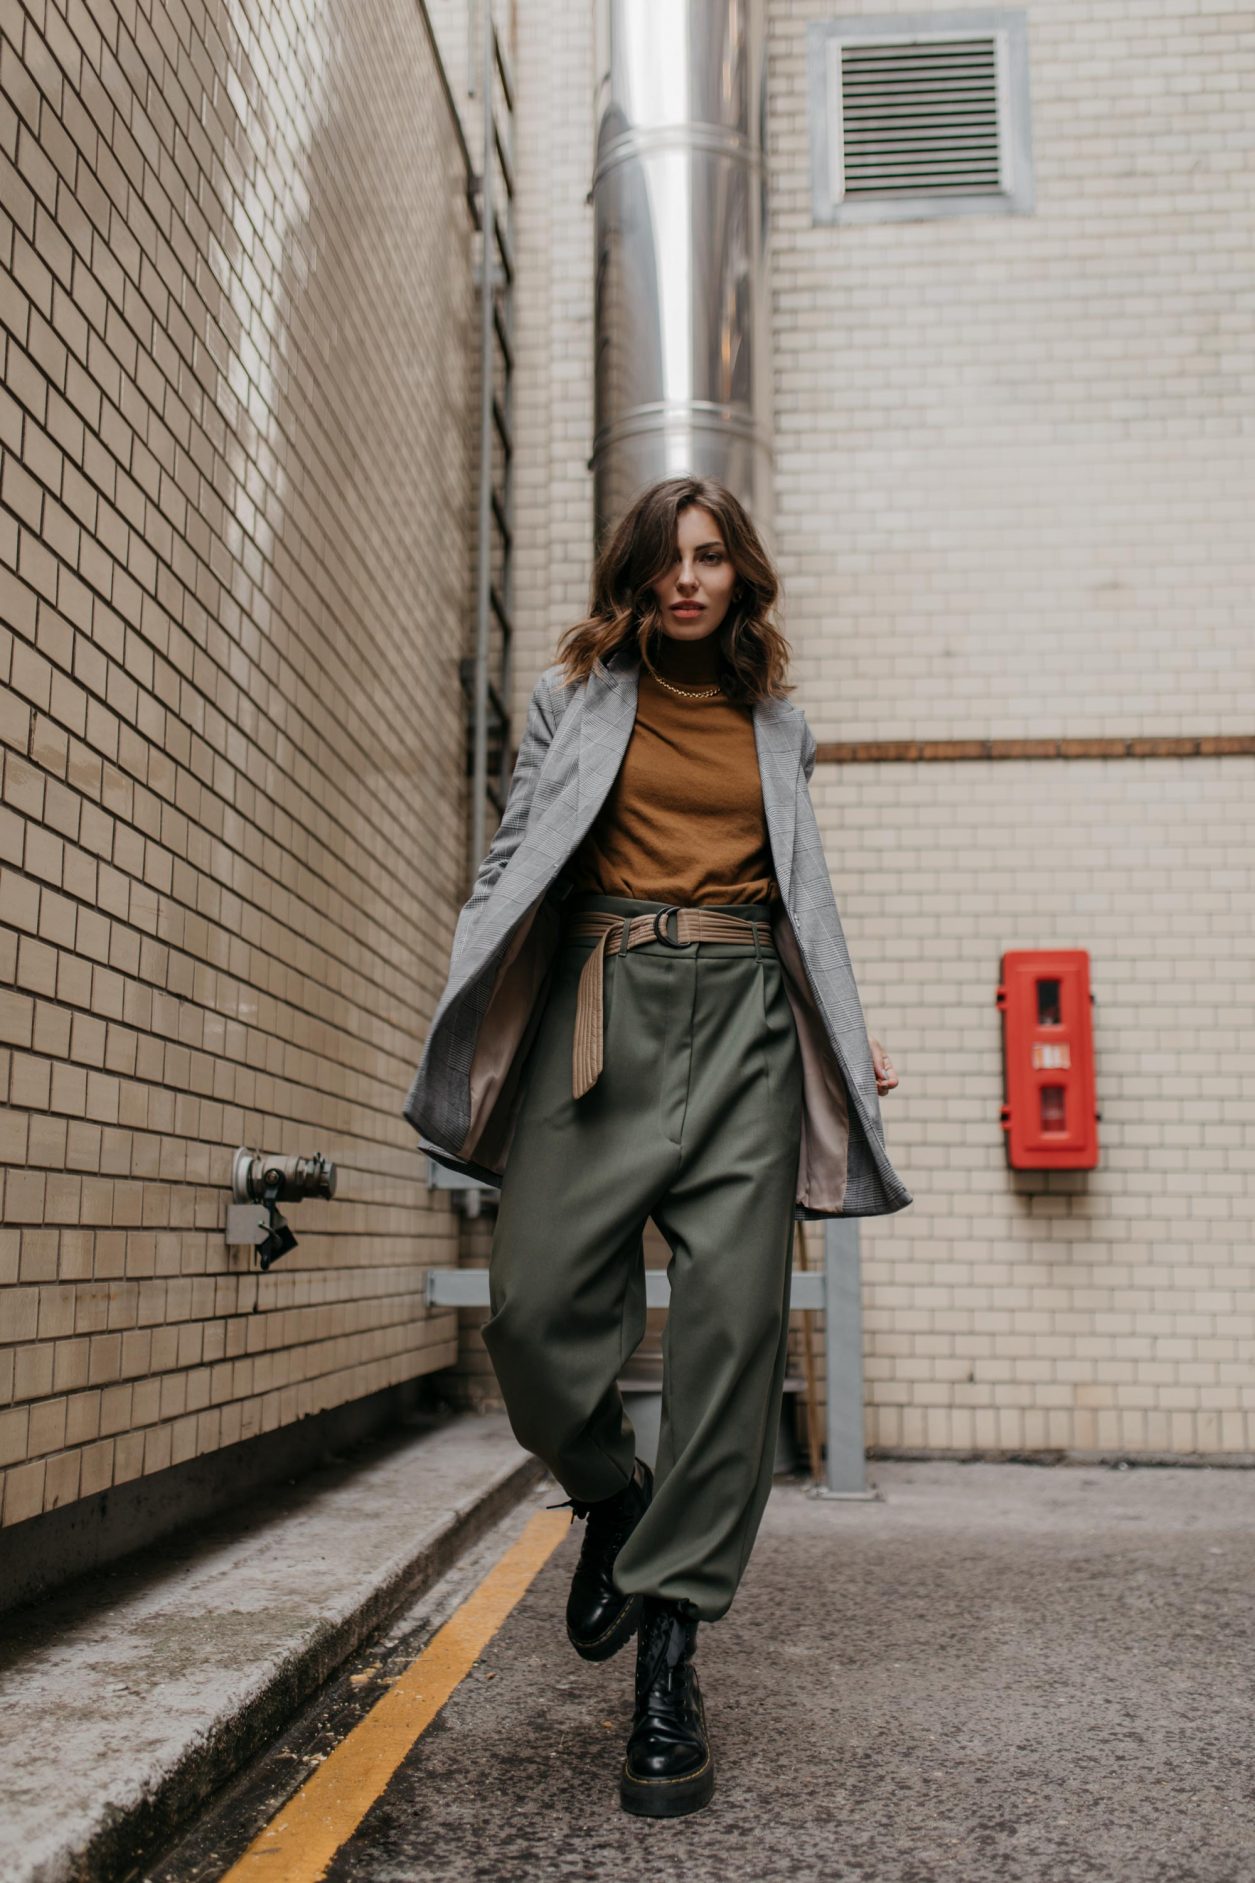 Streetstyle by Masha Sedgwick | Fashion blogger from Berlin, Germany | Everyday outfit inspiration, business casual looks, minimalistic, effortless cool | Outfit: grey checked Topshop blazer, mustard brown Uniqlo roll-neck,
khaki green military Munthe pants, 
black leather Dr.Martens boots #ootd